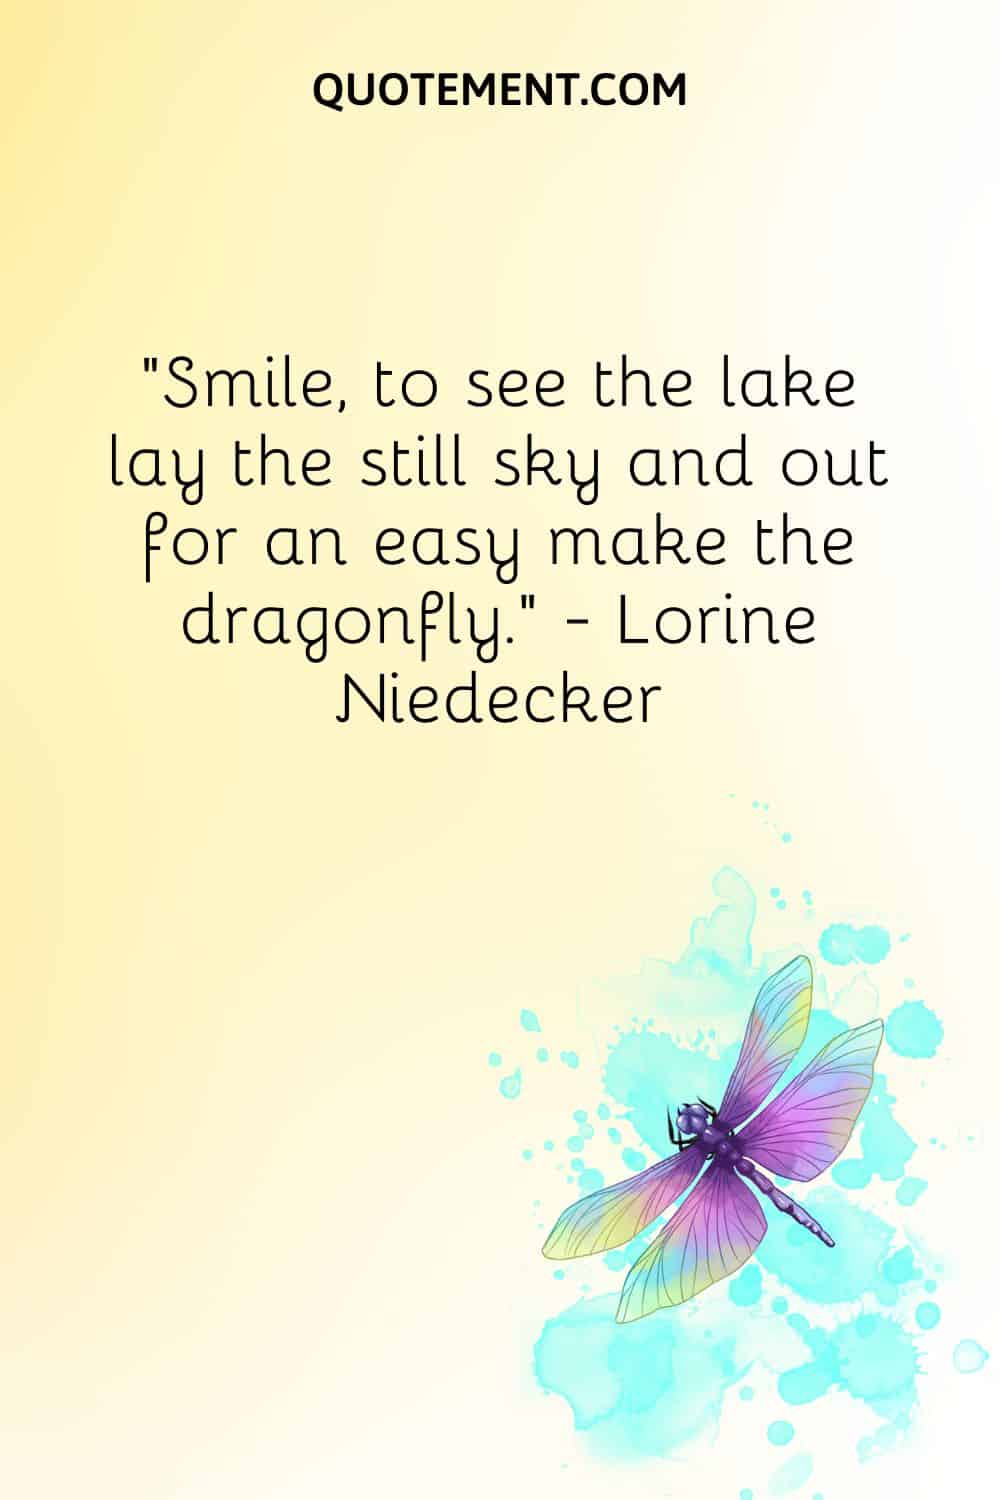 Smile, to see the lake lay the still sky and out for an easy make the dragonfly